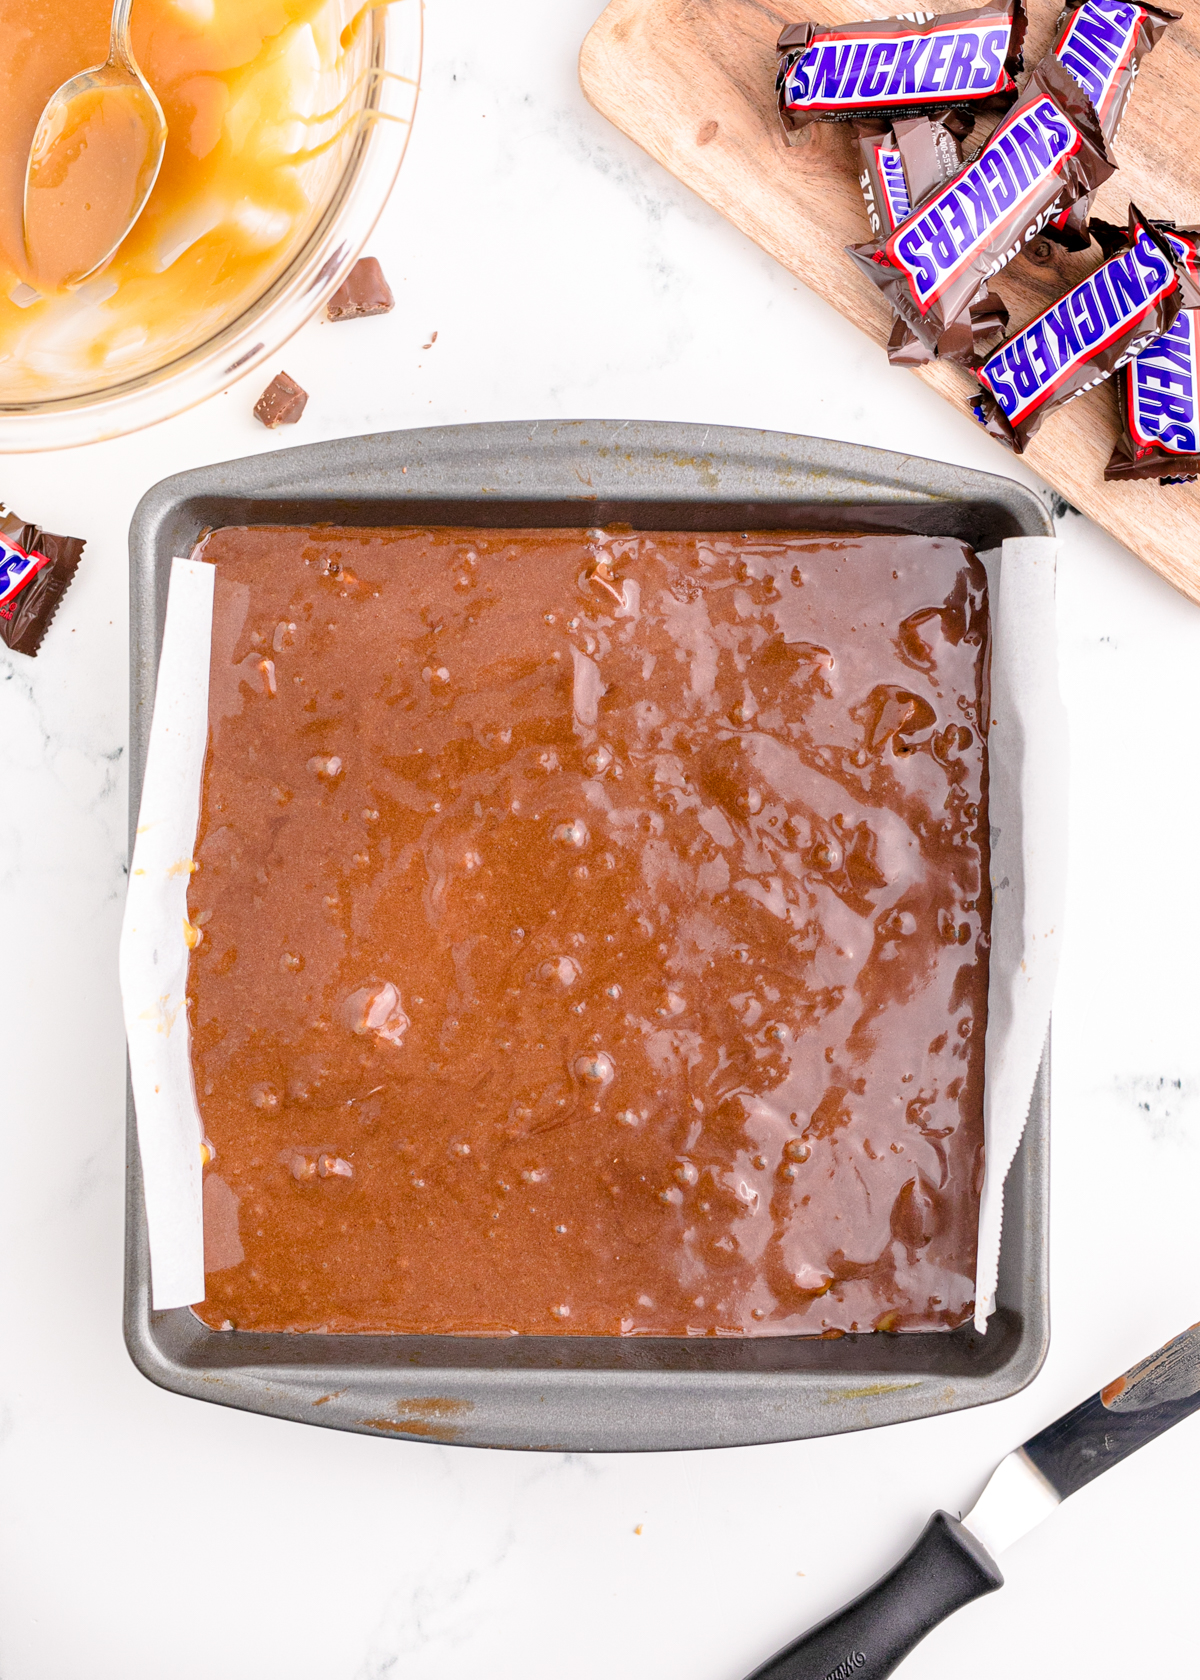 unbaked snickers brownies